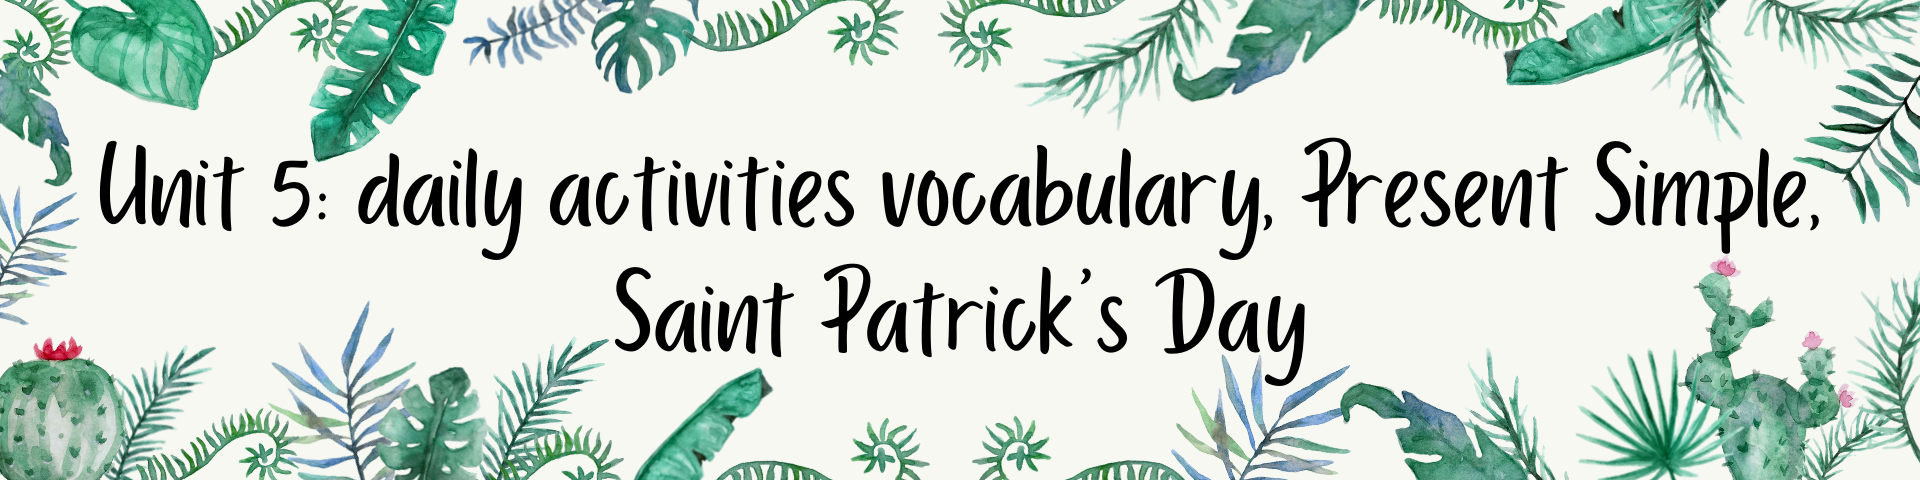 Unit 5: daily activities vocabulary, Present Simple, Saint Patrick's Day